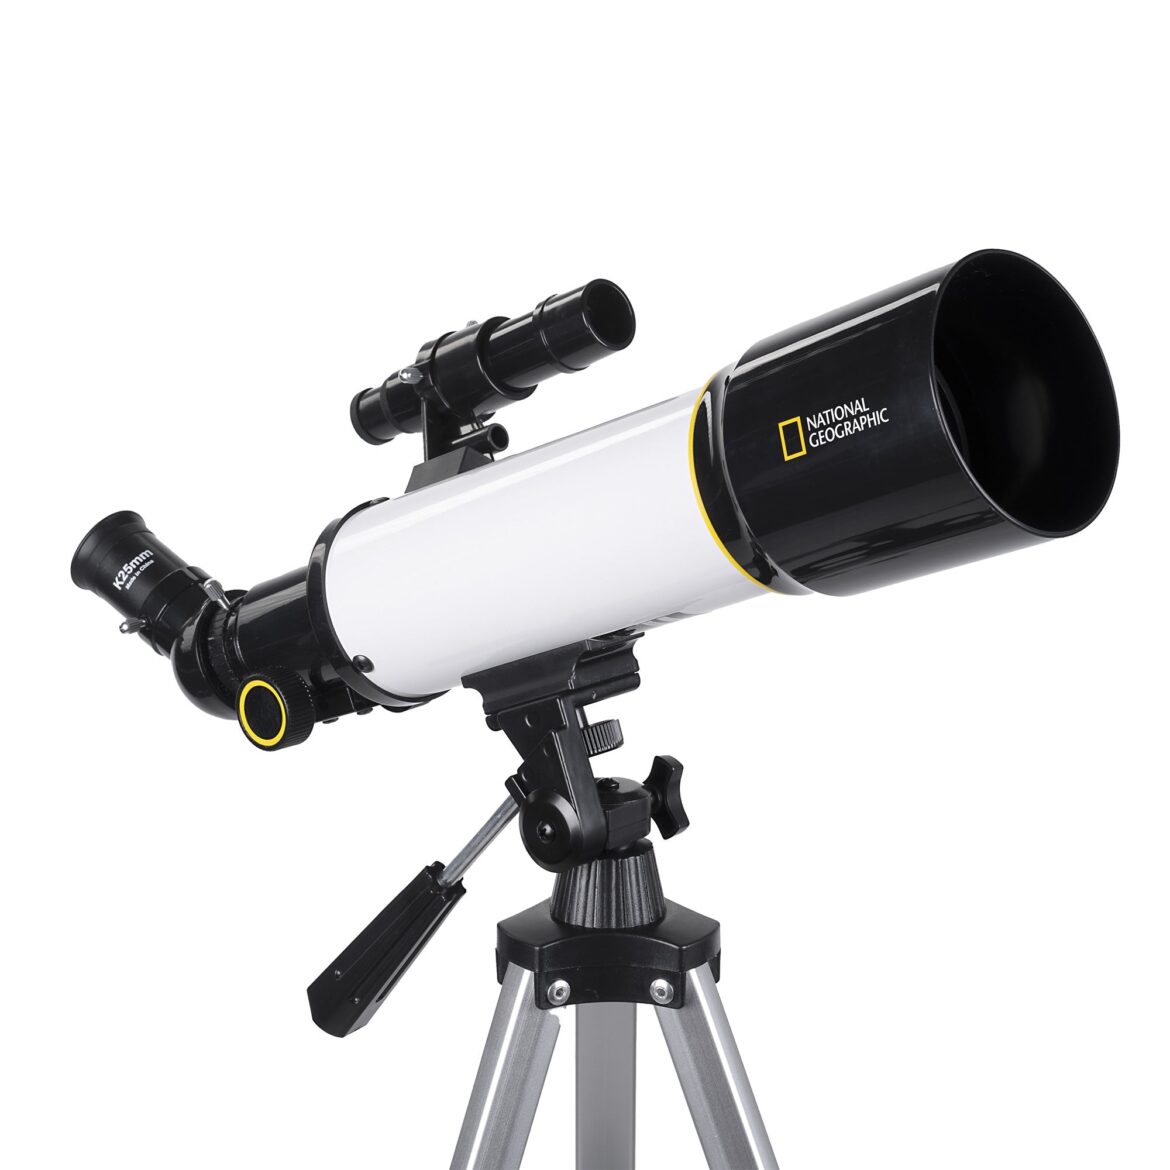 National Geographic SKY VIEW 70 – 70mm Refractor Telescope with Panhandle Mount – 80-00370